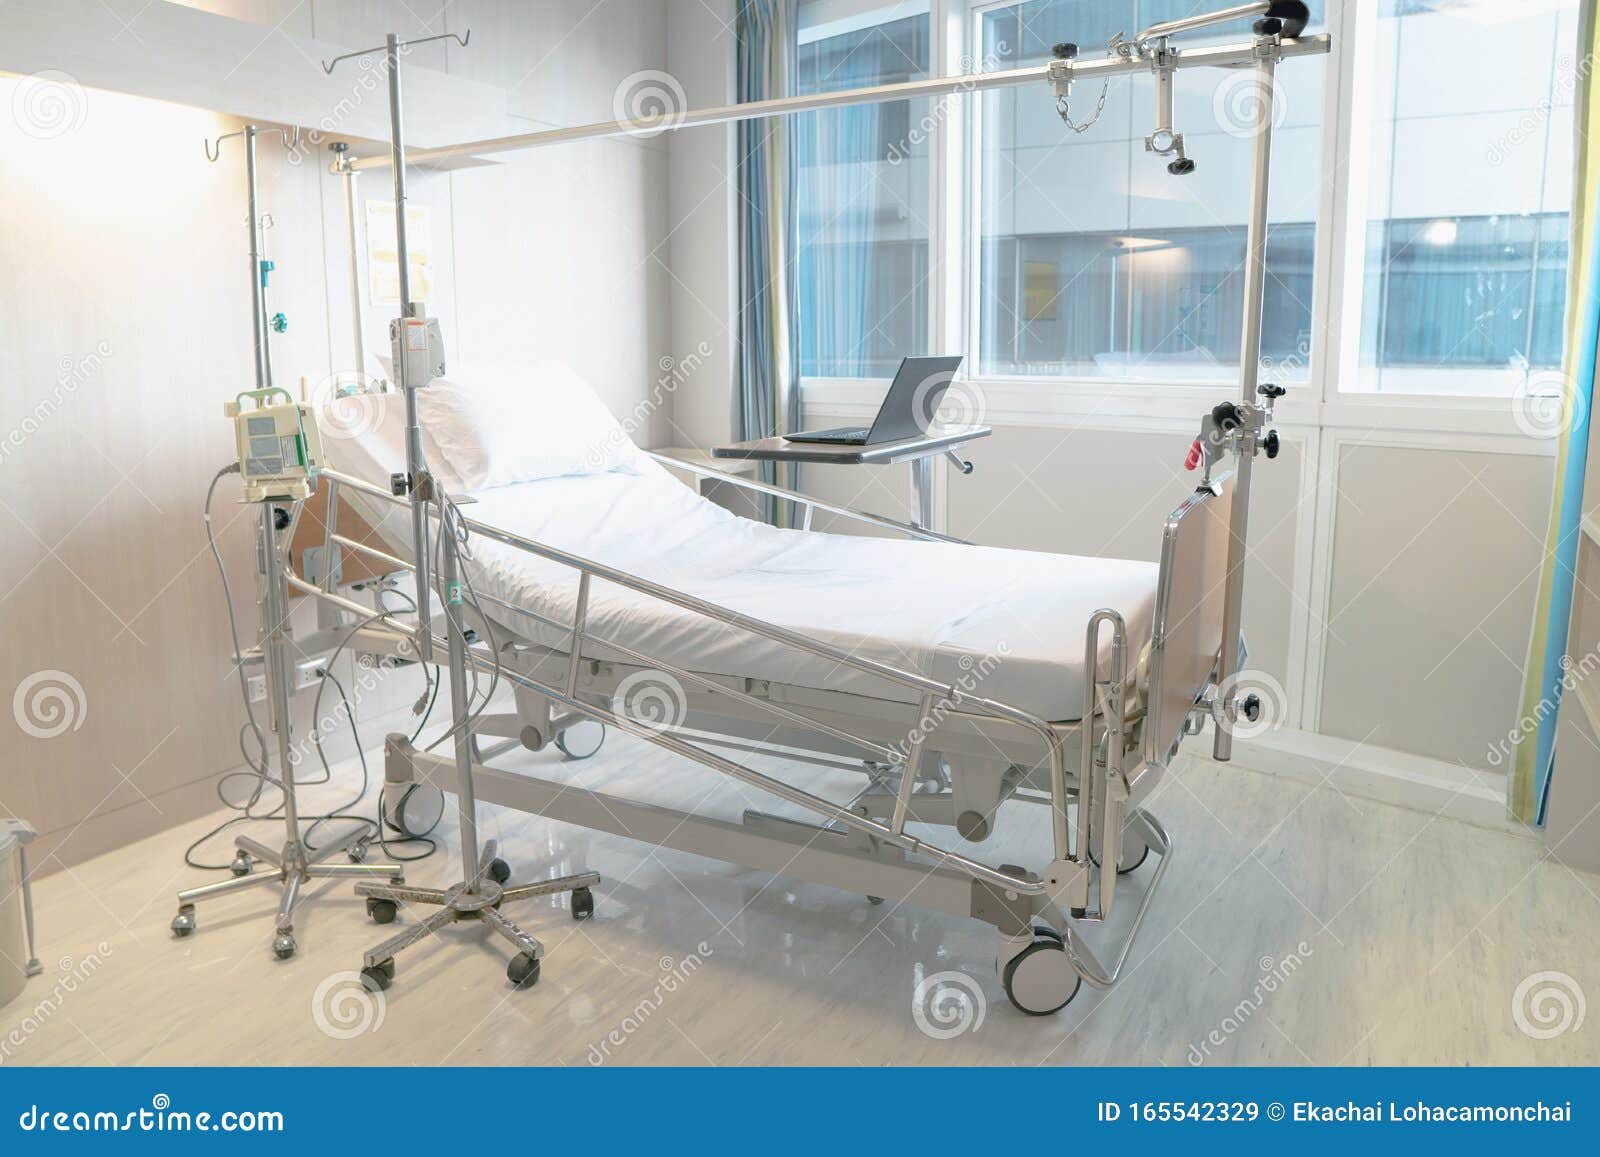 Focus Background of Electrical Adjustable Patient Bed in Hospital Room  Stock Image - Image of healthcare, background: 165542329